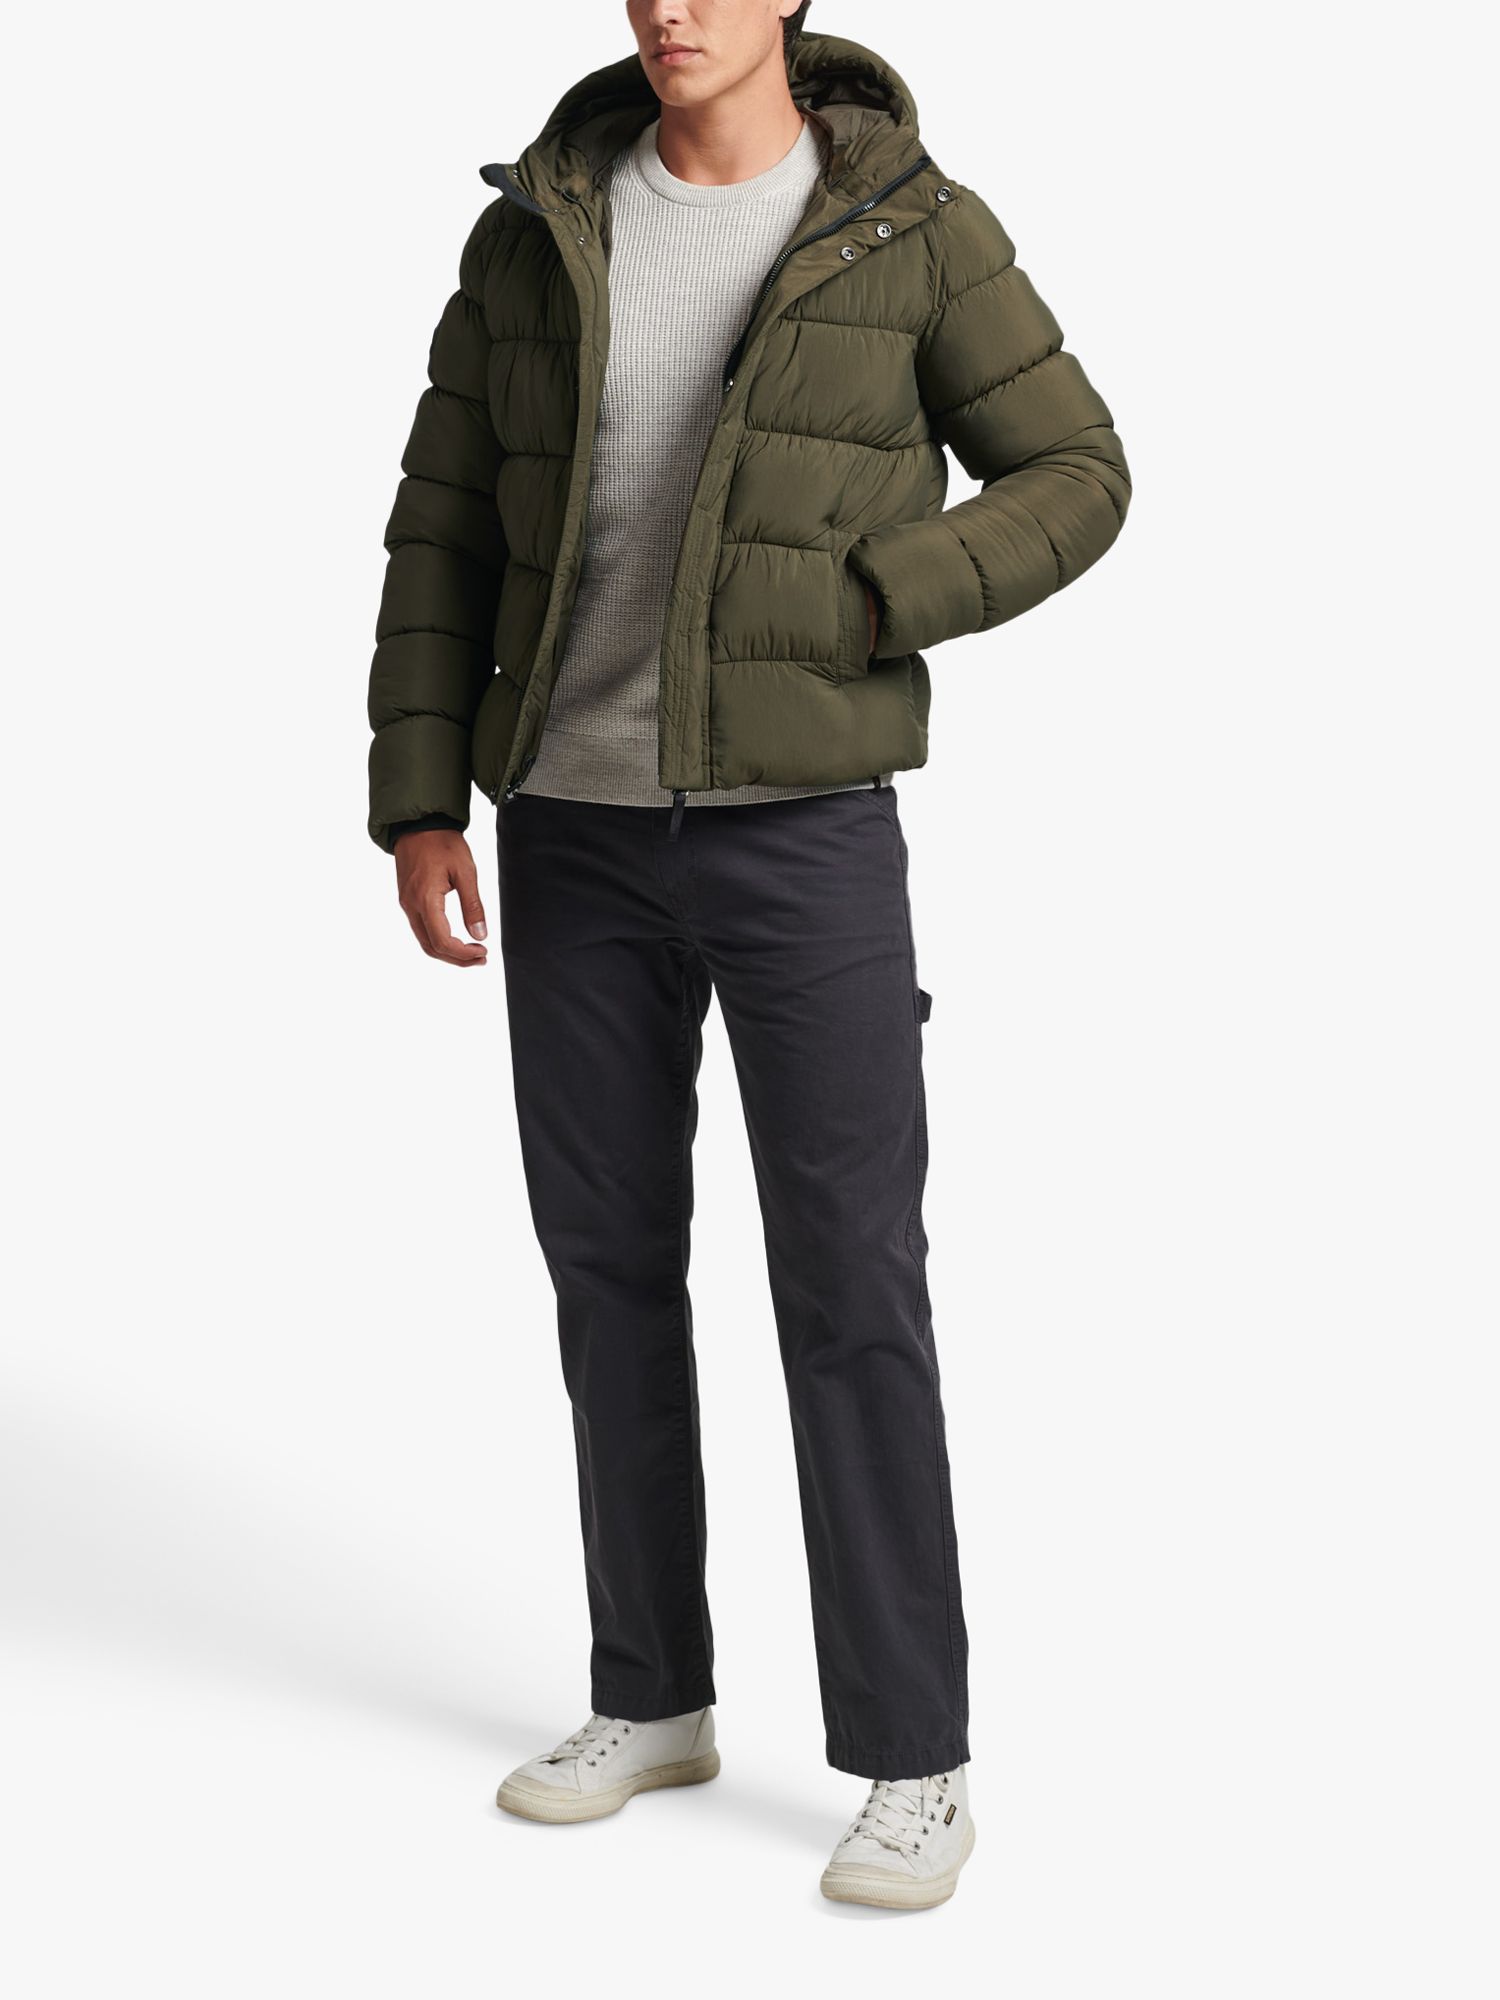 Superdry Hooded XPD Sports Puffer Jacket at John Lewis & Partners